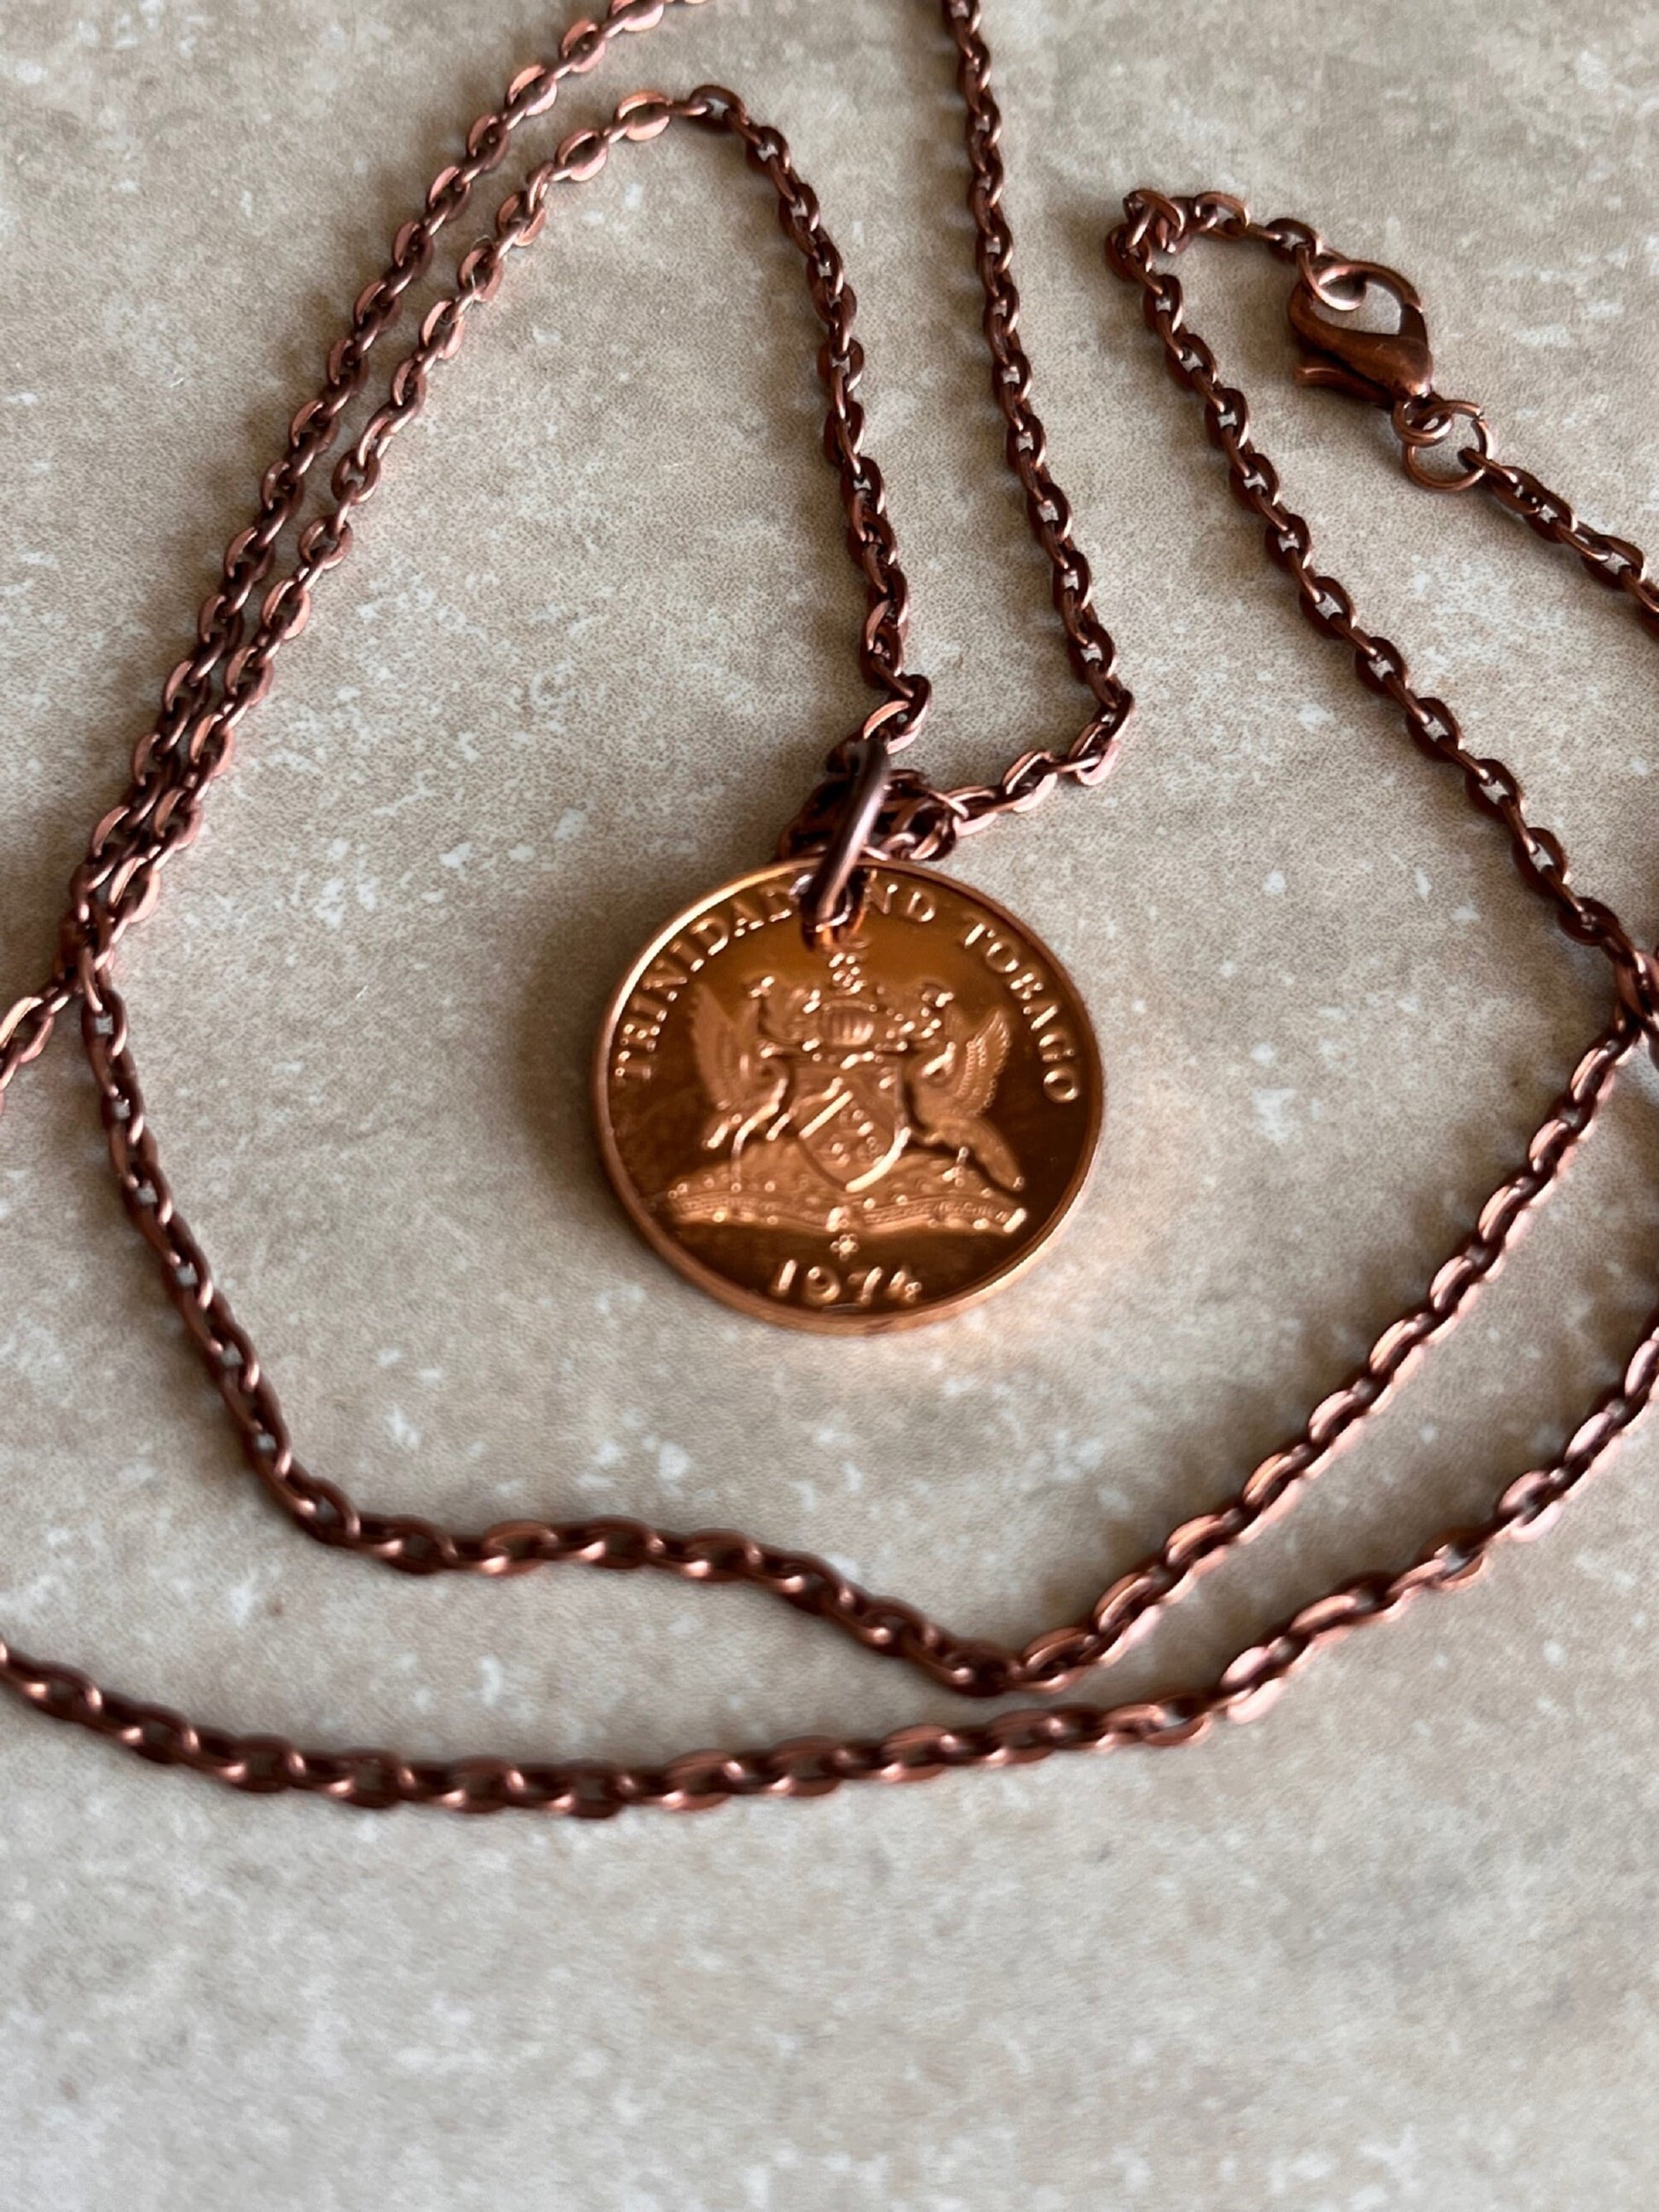 Trinidad and Tobago Coin Necklace From A Mint Set, 5 Cents Pendant Vintage Custom Made Rare Coins Coin Enthusiast Fashion Accessory Handmade